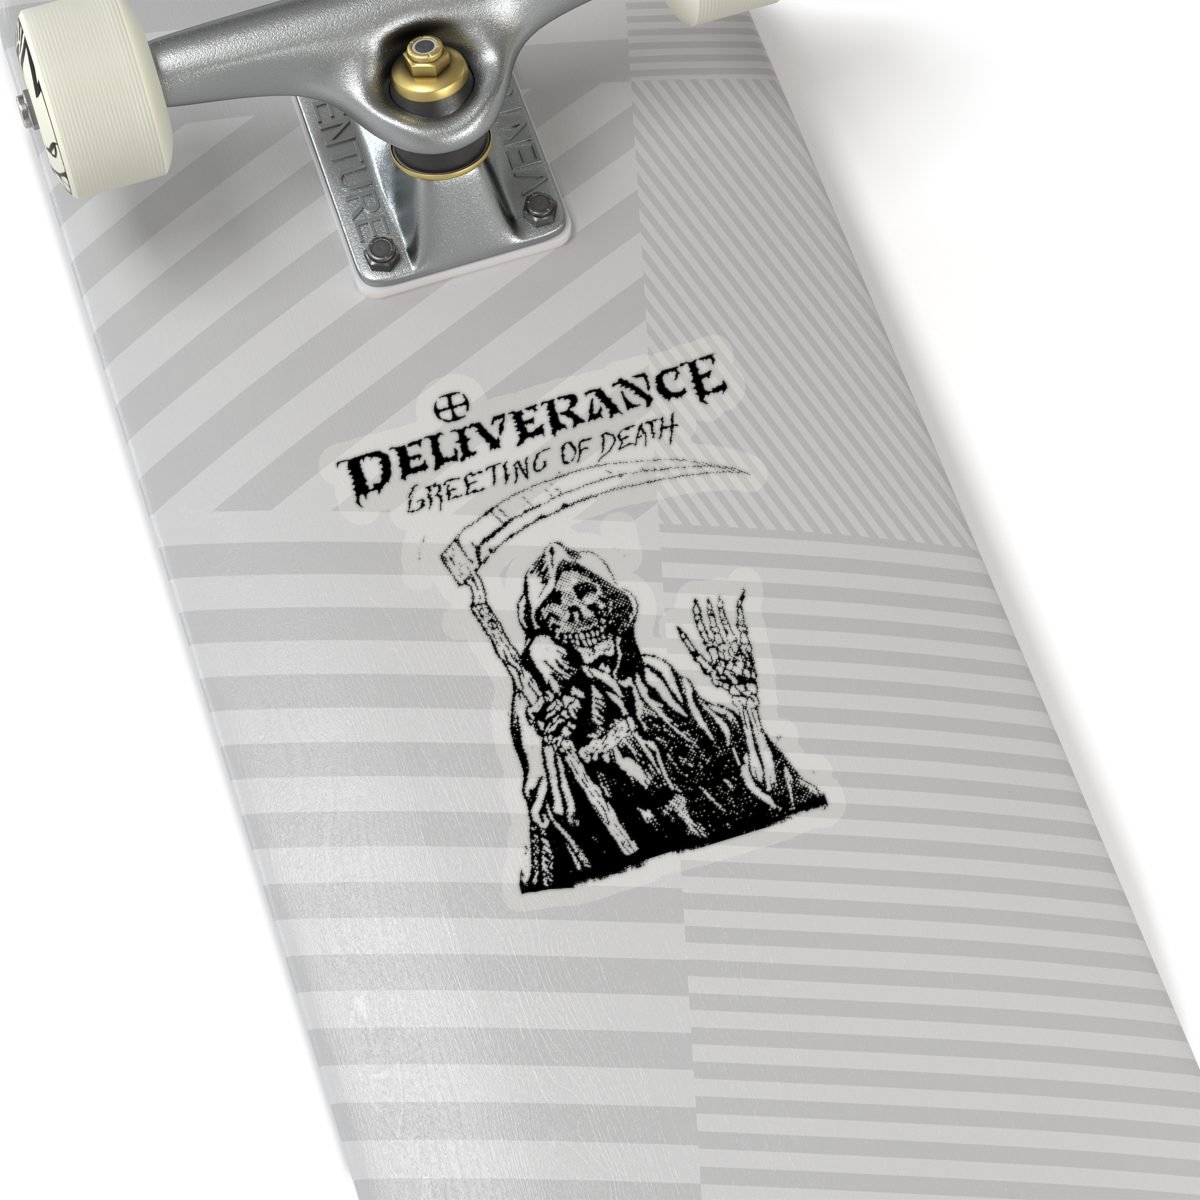 Deliverance – Greetings of Death Die Cut Stickers